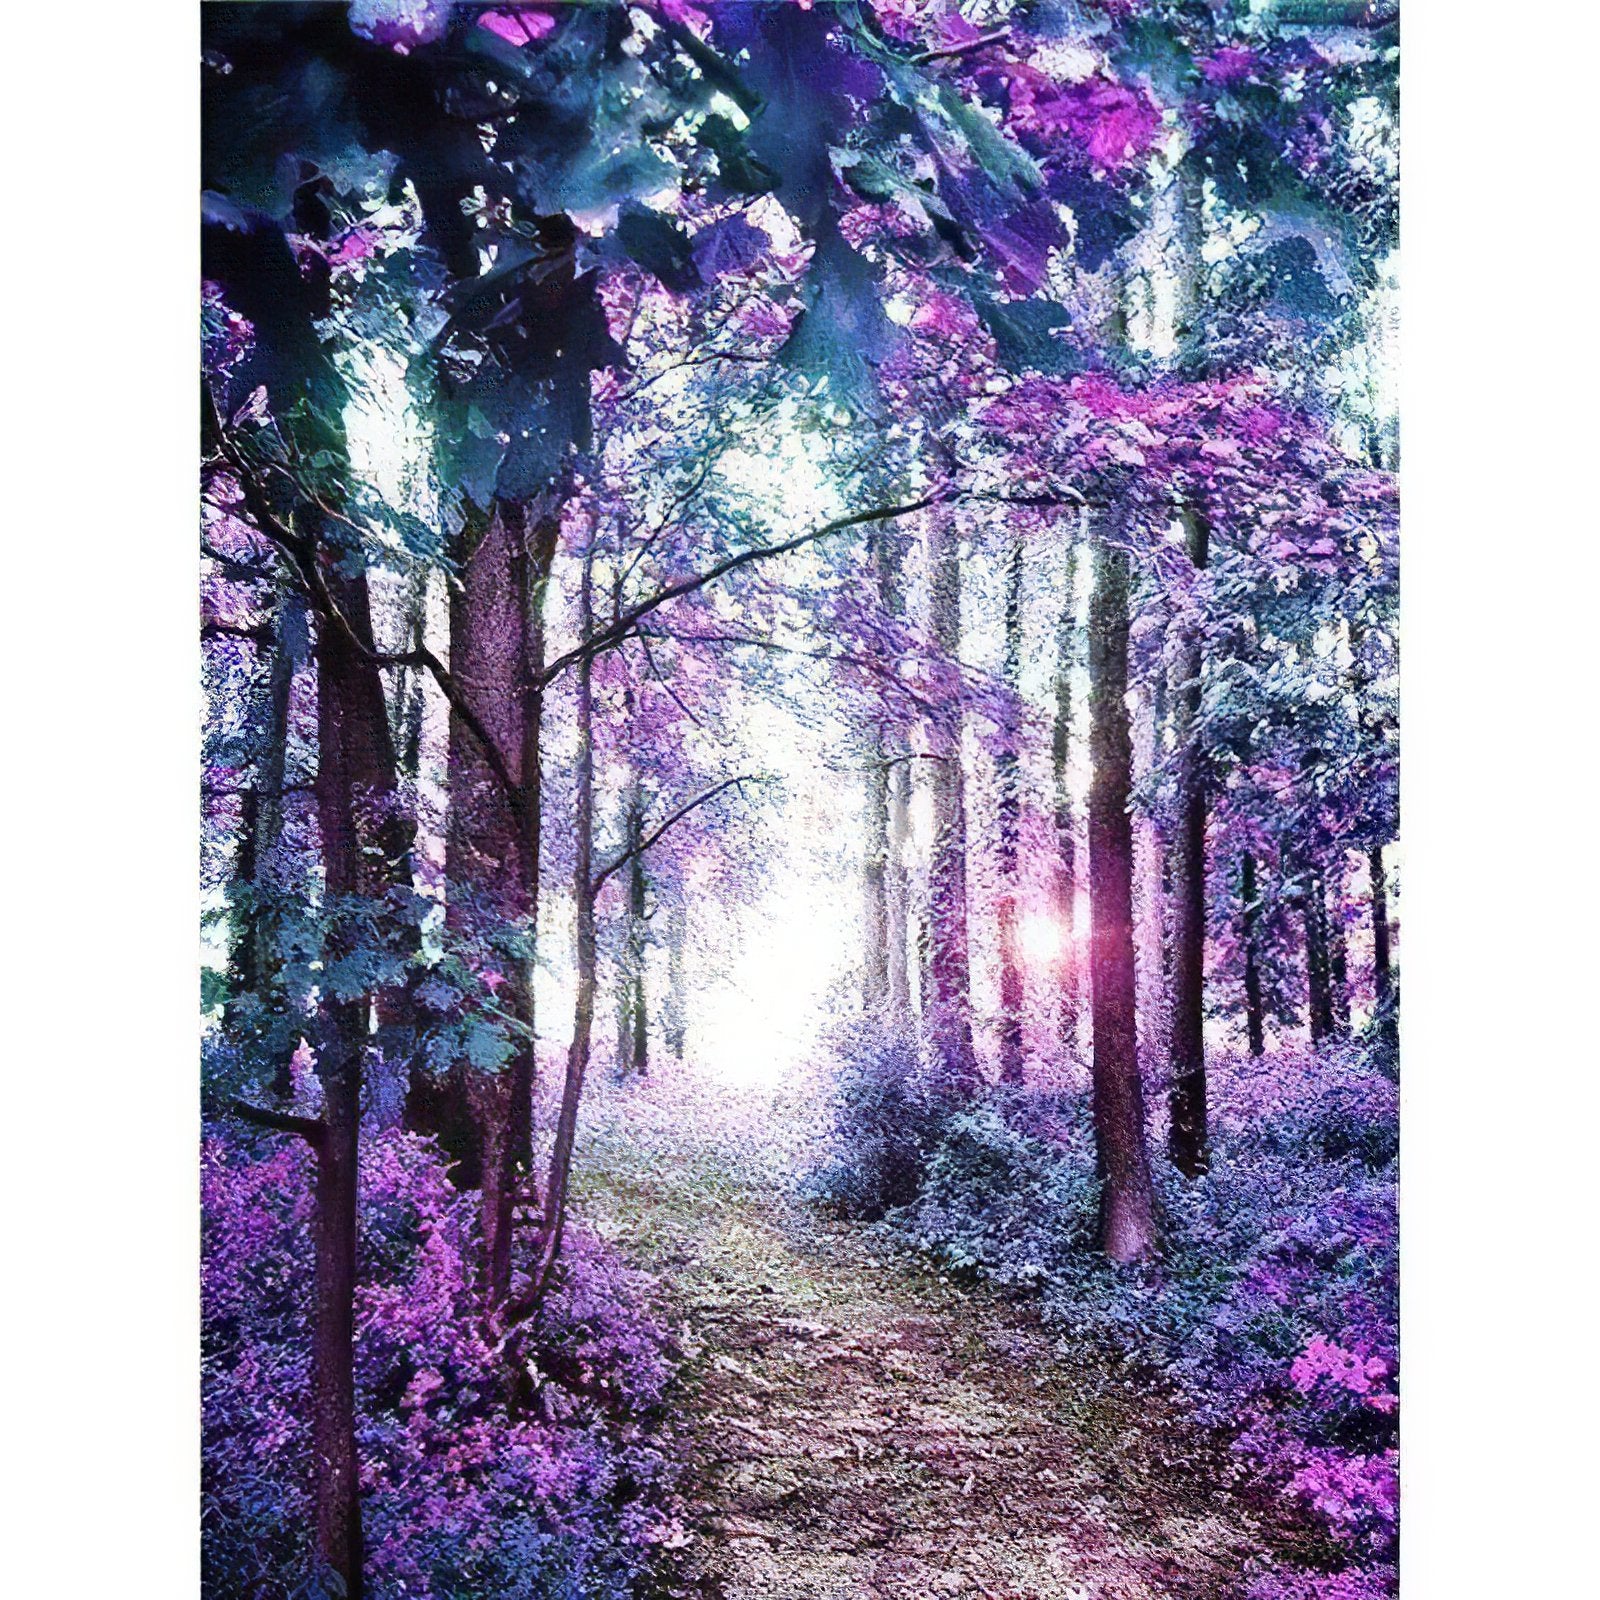 Get lost in the Purple Flower Forest, a mystical place where nature's beauty shines.Purple Flower Forest - Diamondartlove